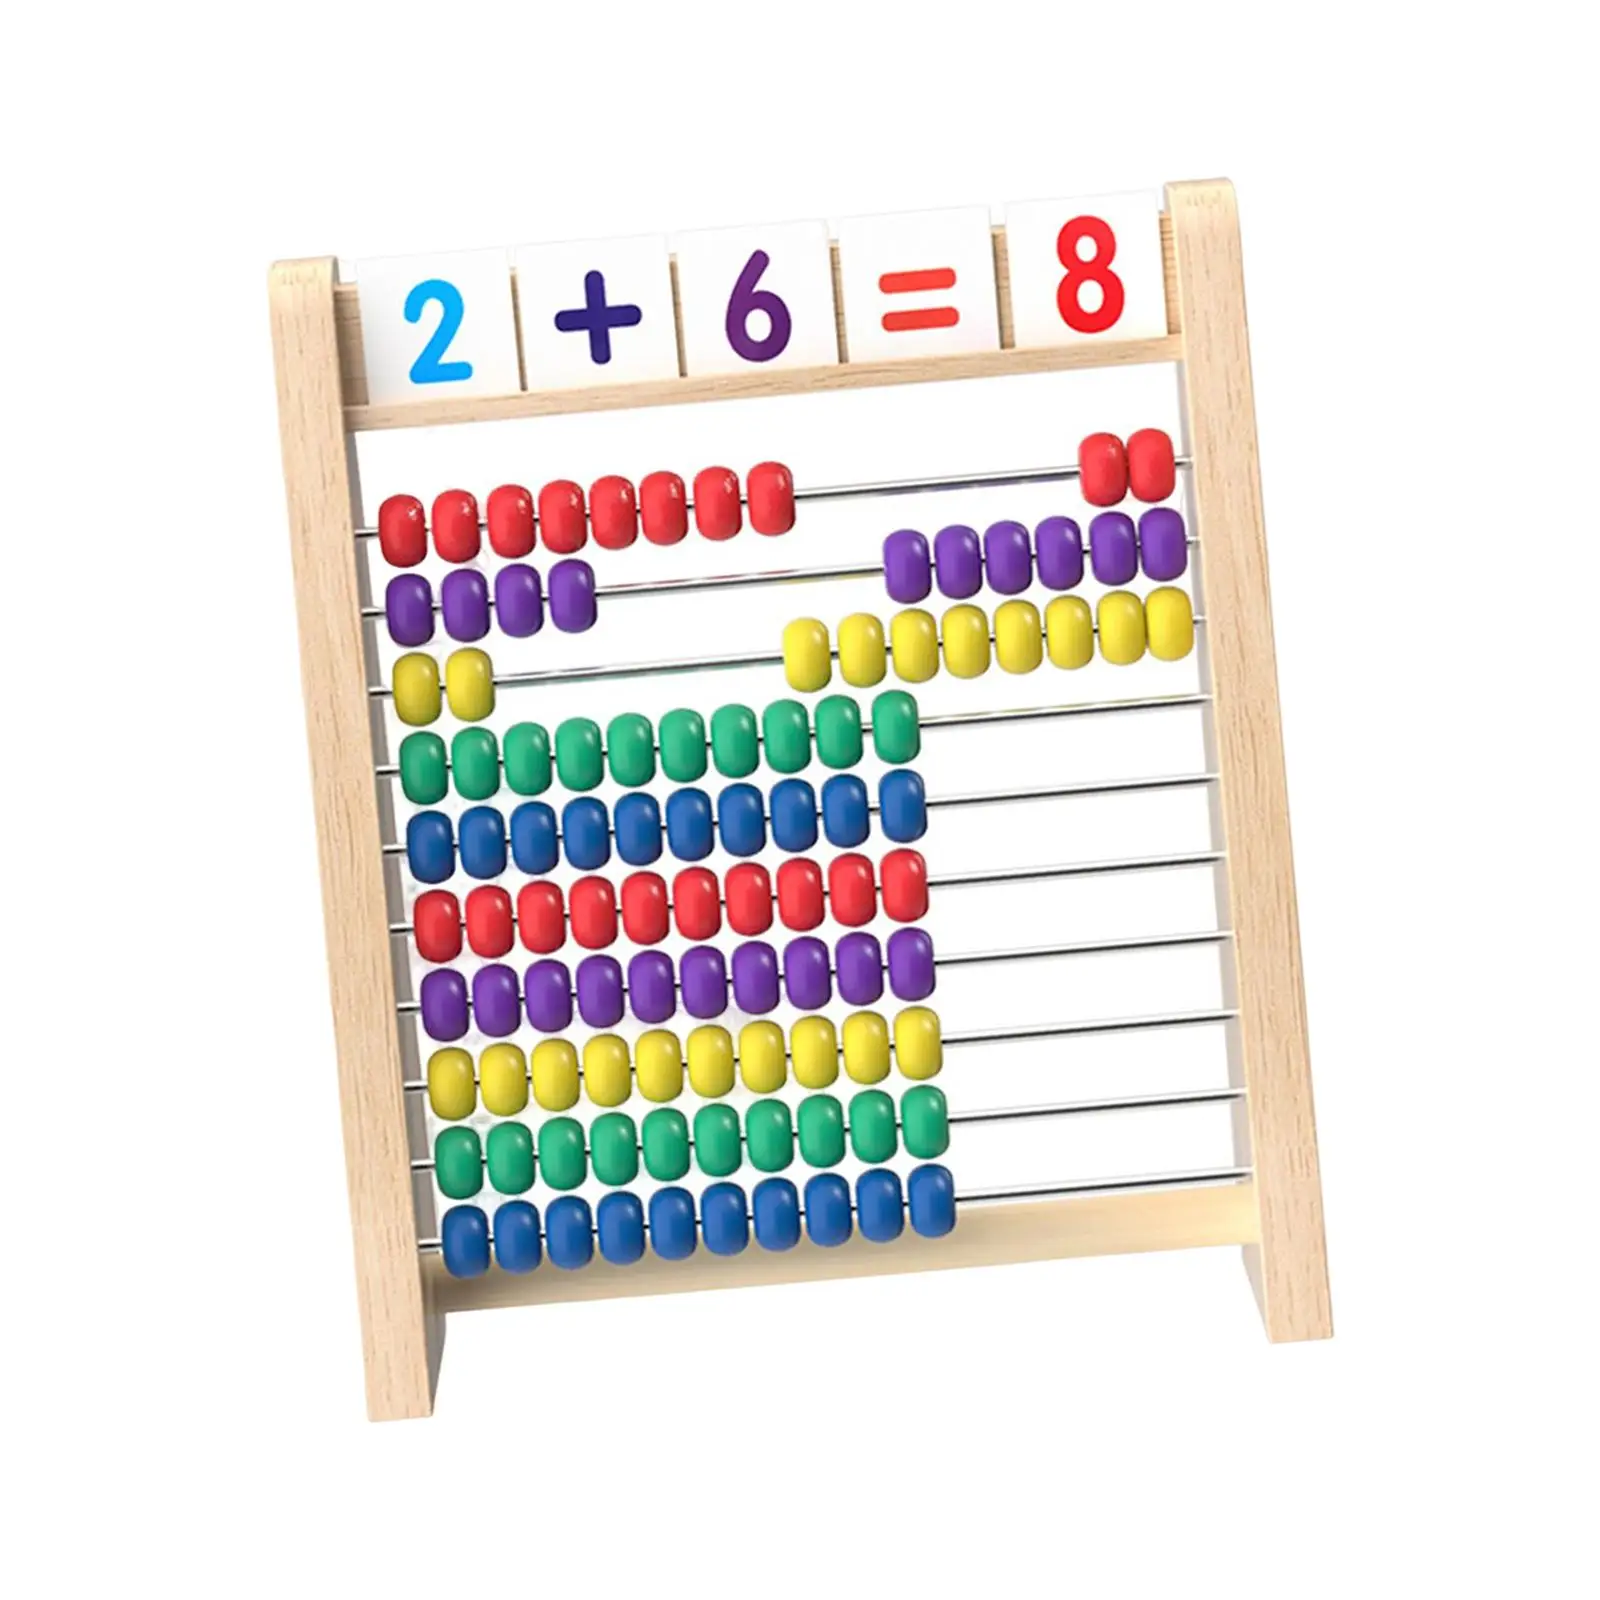 Preschool Learning Toy Counting Math Teaching Aids Math Learning Toys for Early Childhood Education Early Development Learning